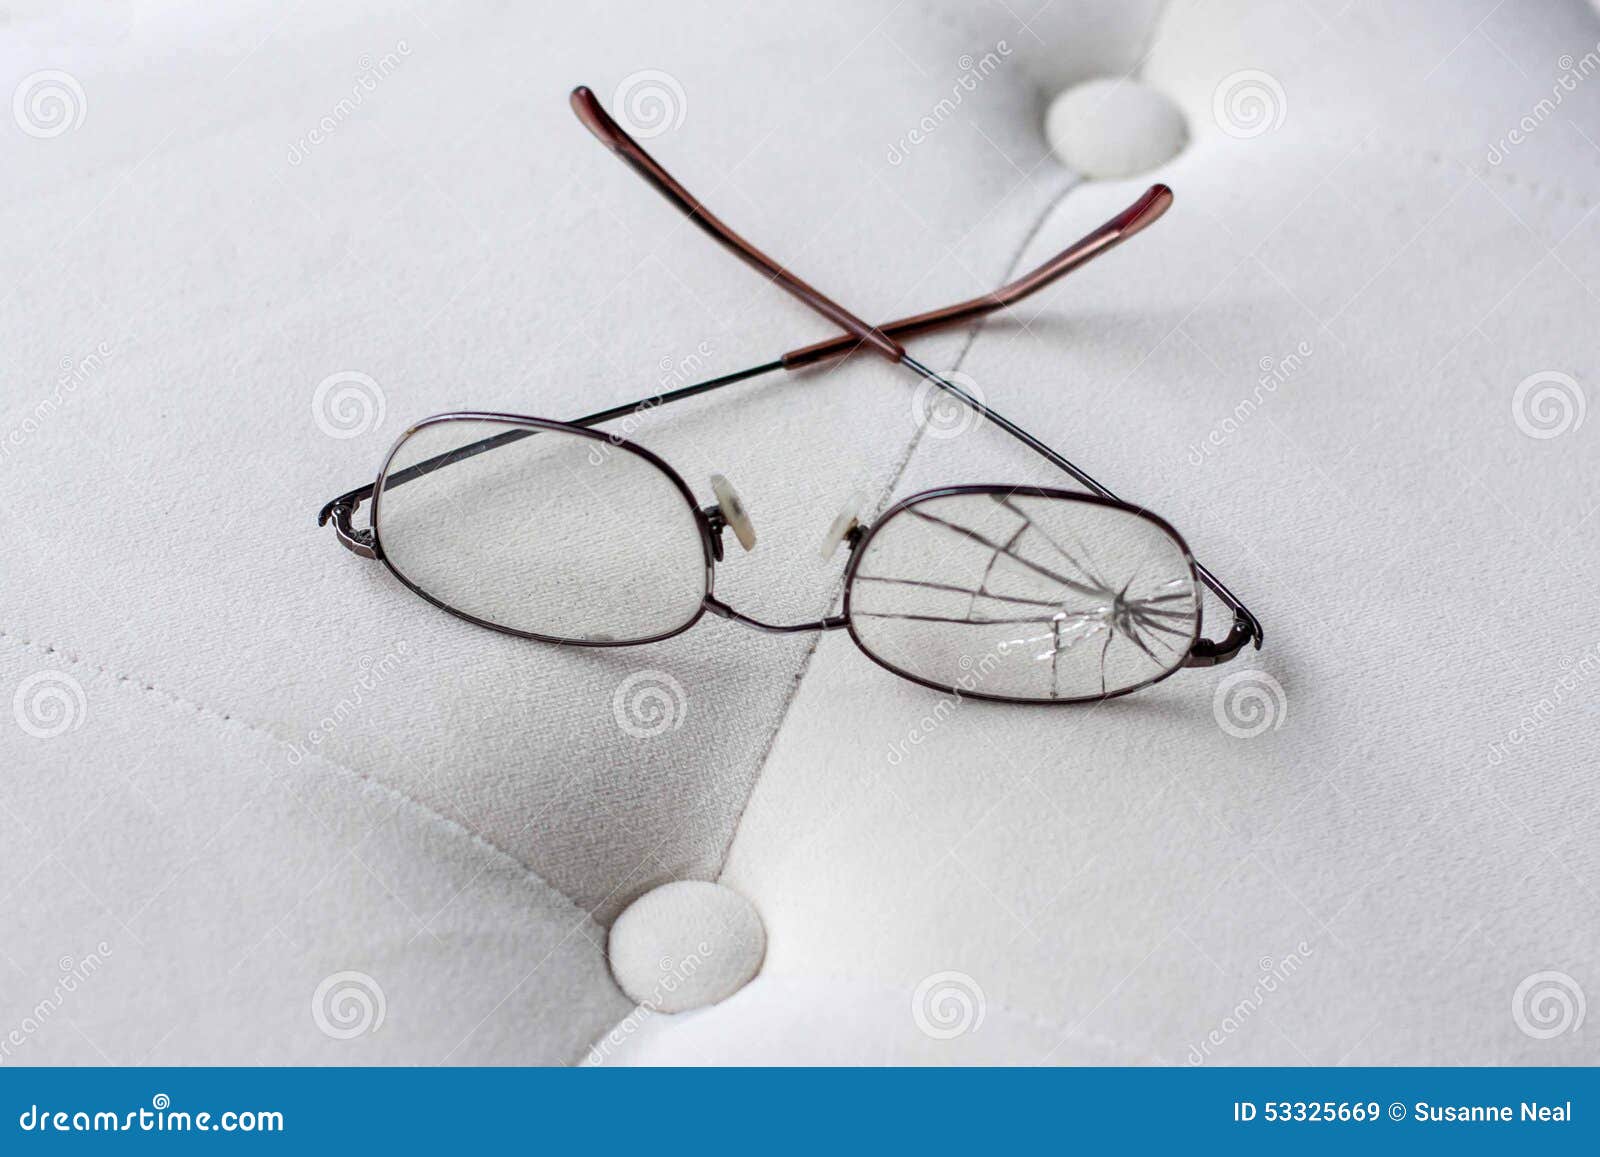 eyeglasses with cracked lens on cream colored ottoman